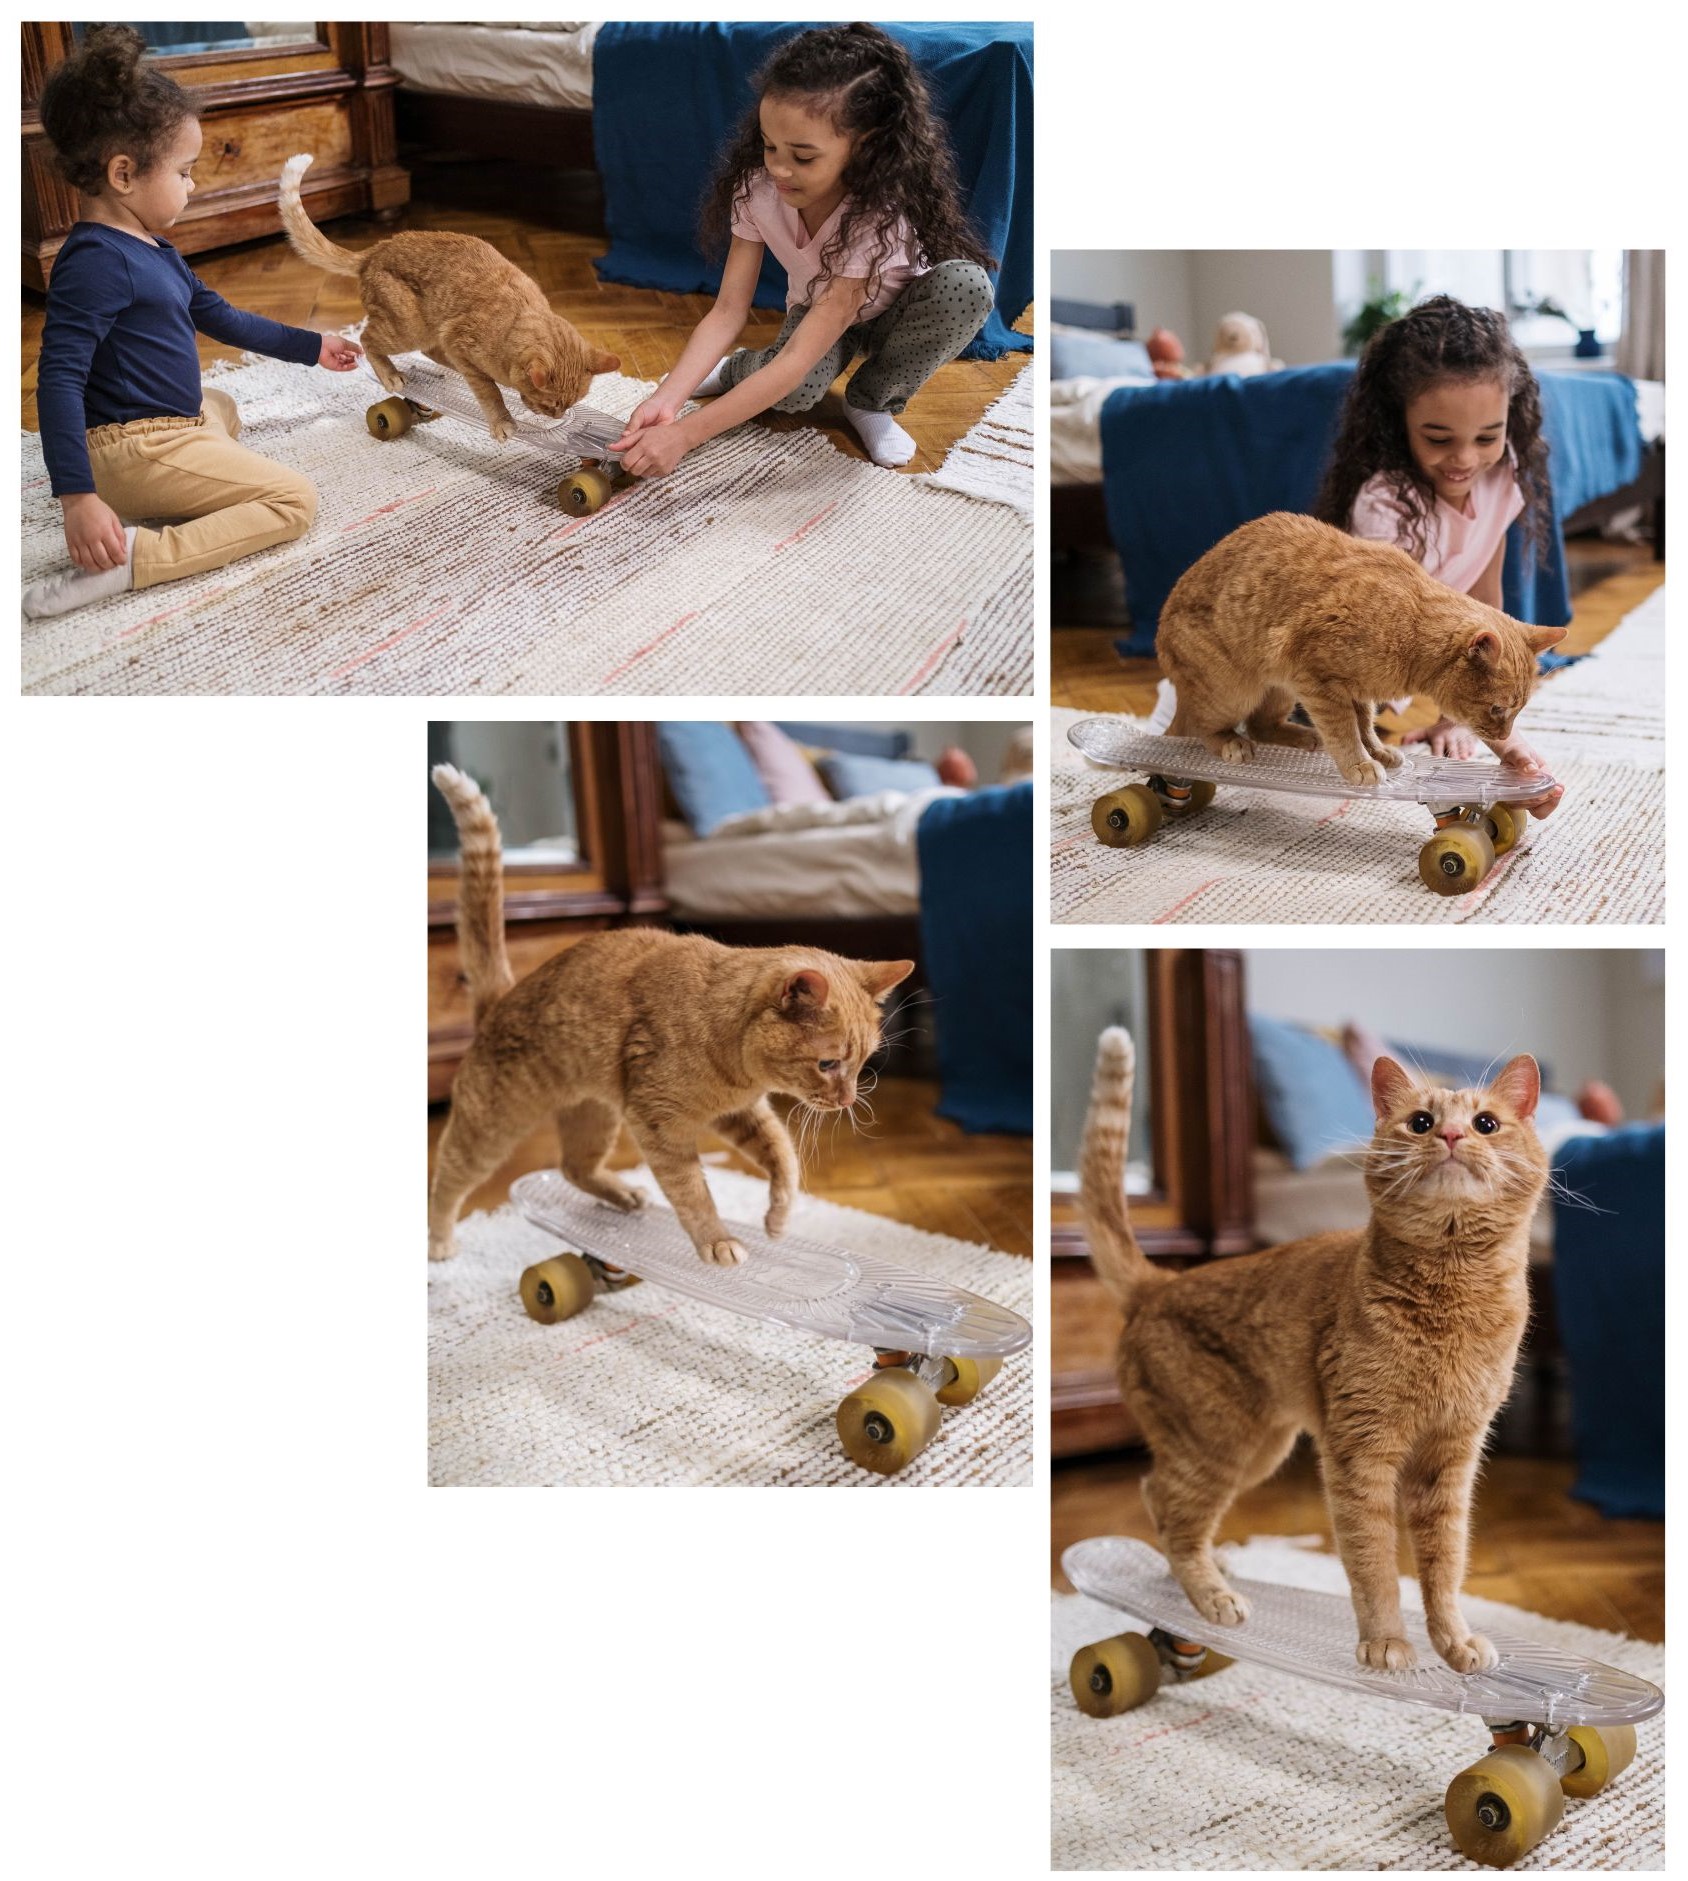 Four images depicting two children playing with an orange cat in their bedroom. Across the photos, the cat is perched in various positions on a small, clear skateboard with yellow wheels. In the final image, the cat stands steady on the skateboard and looks up at the camera in a pose of satisfaction.